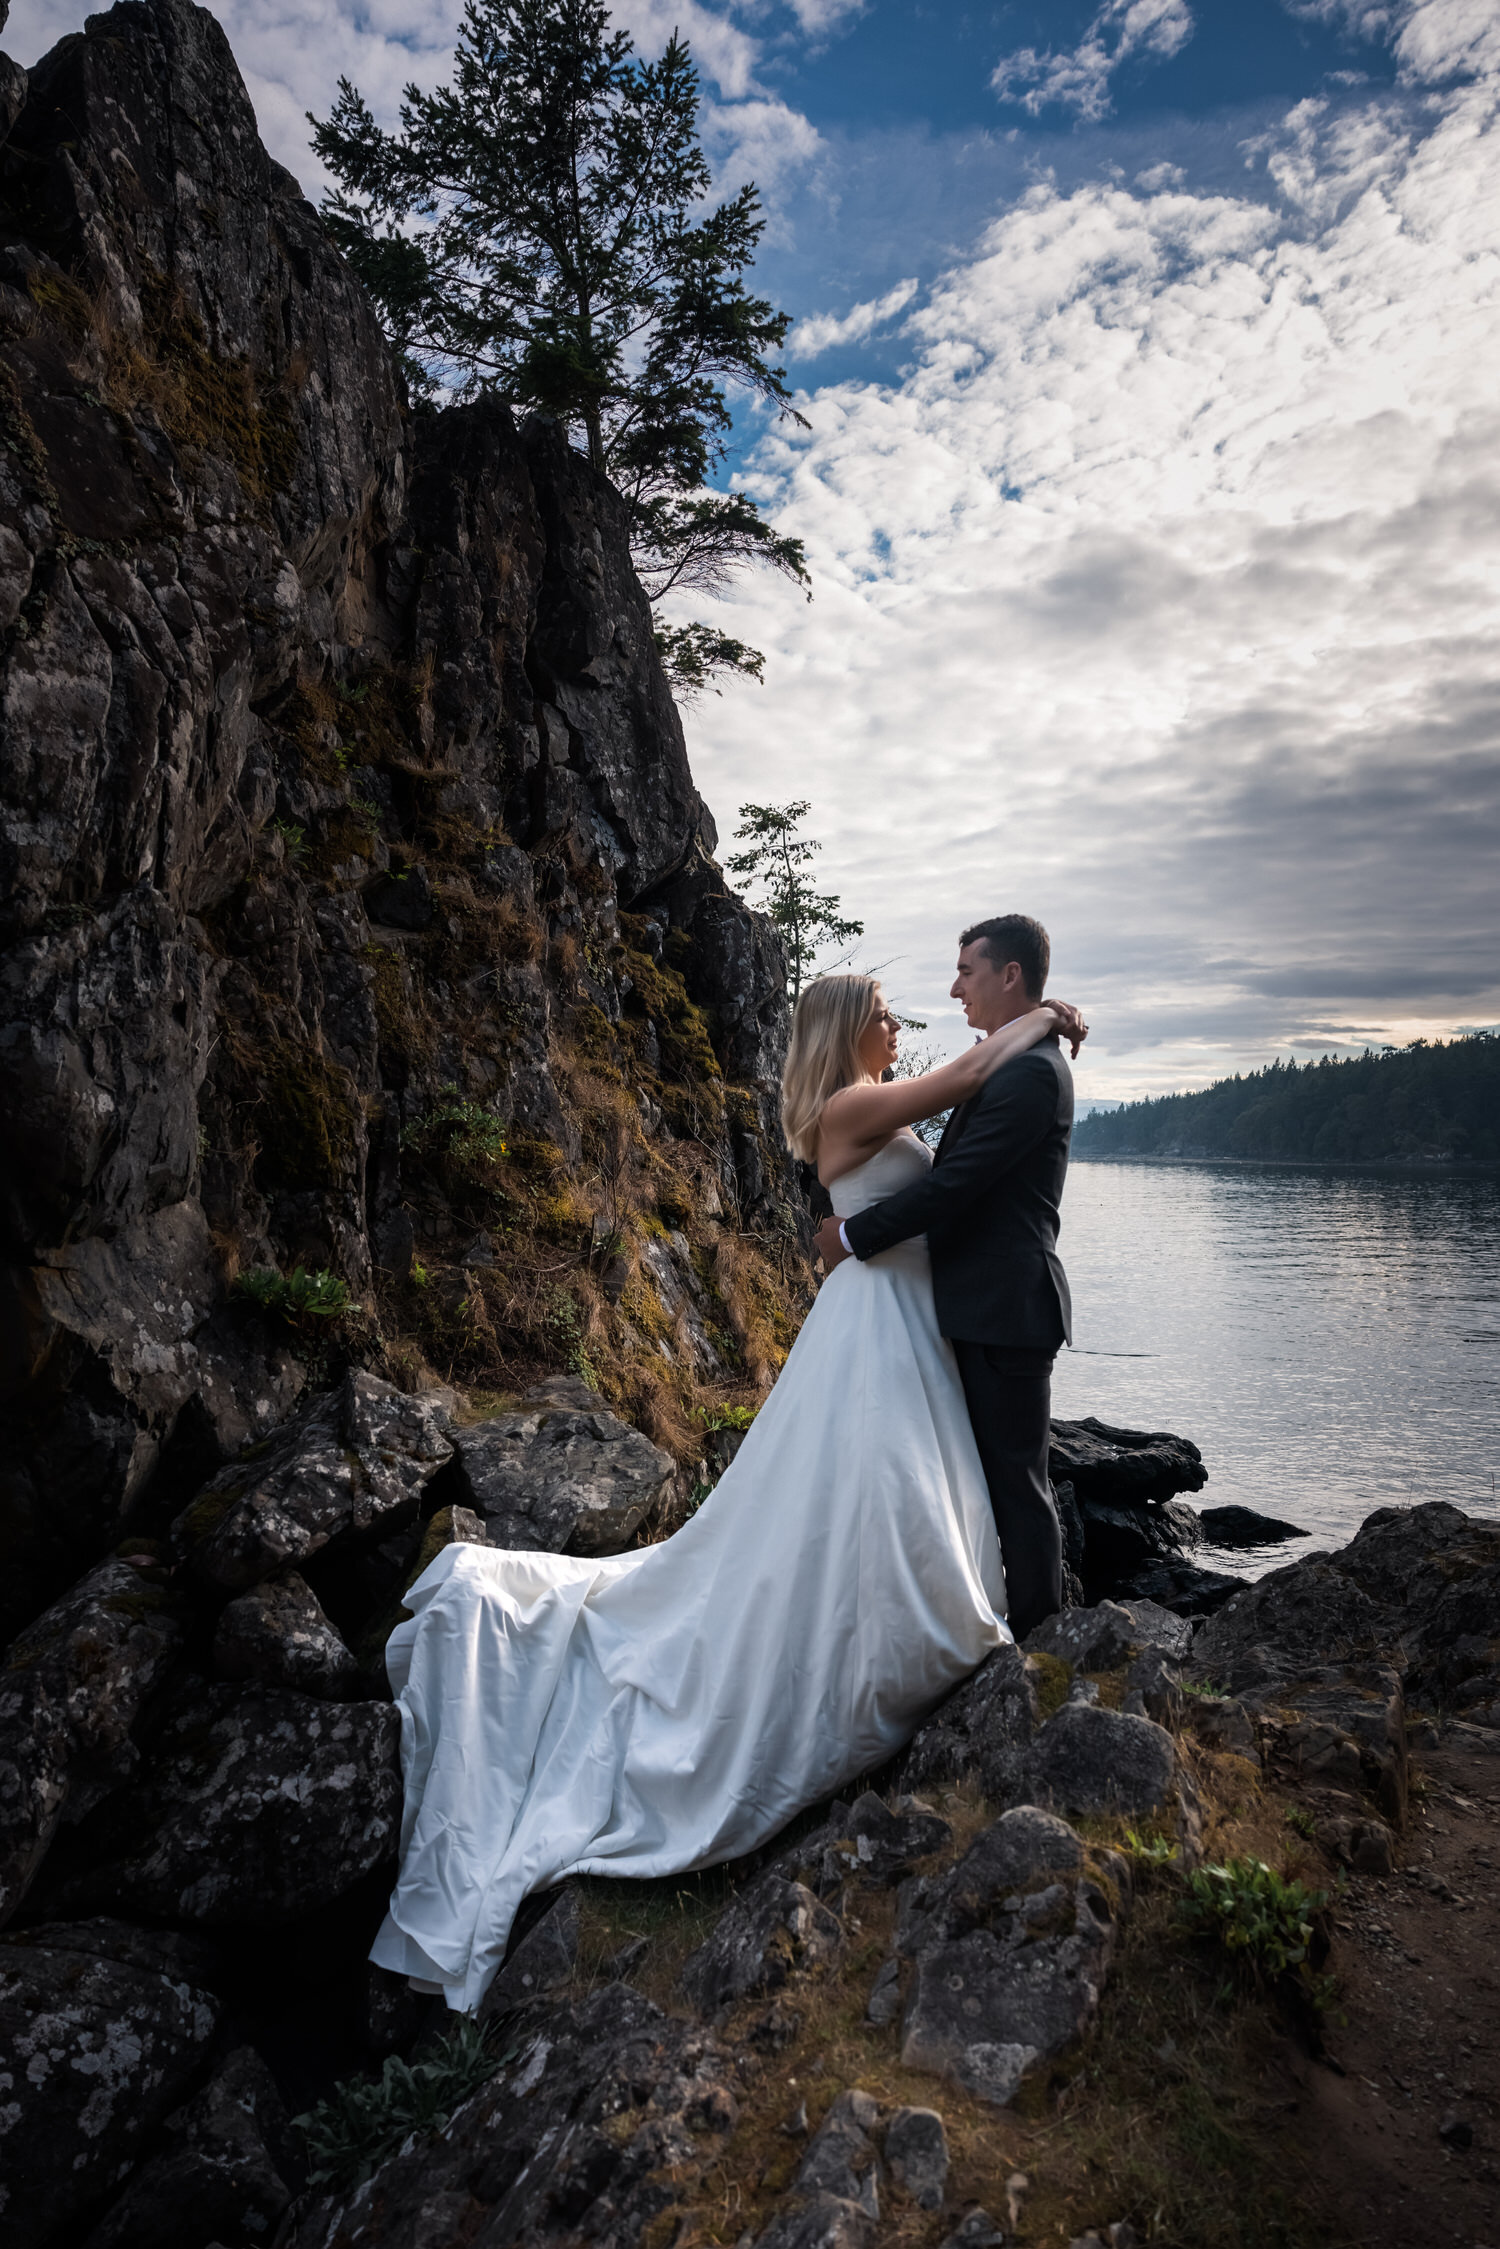 Vancouver Island Adventure Elopement and Small Wedding Photographer - Allie Knull's Photography-24.jpg